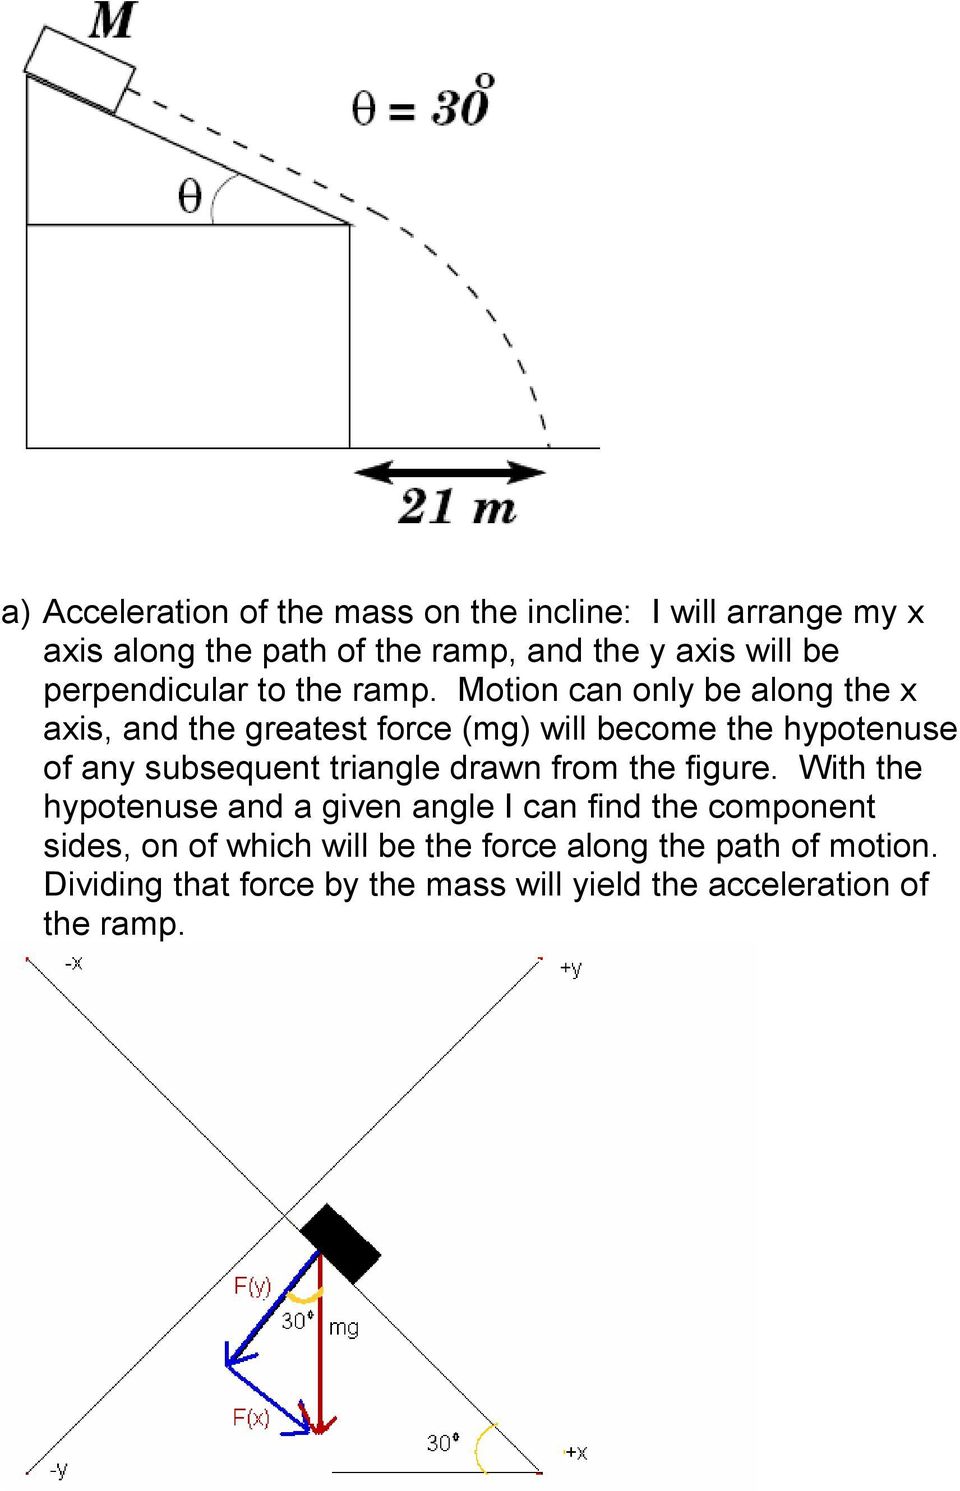 Motion can only be along the x axis, and the greatest force (mg) will become the hypotenuse of any subsequent triangle